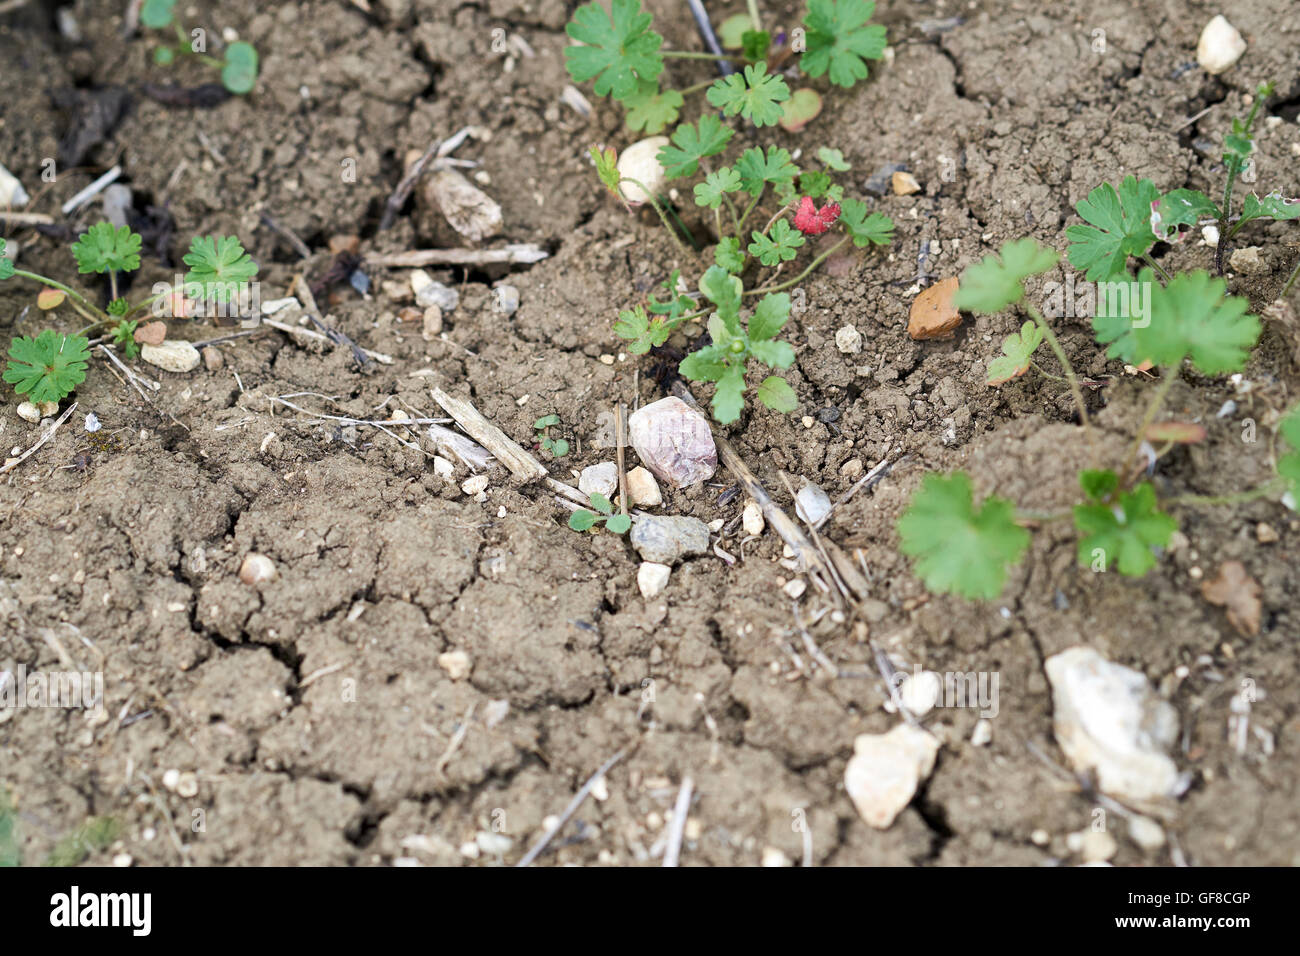 Dry desiccated clay rich agricultural soil with stones and weeds, England, UK. Stock Photo